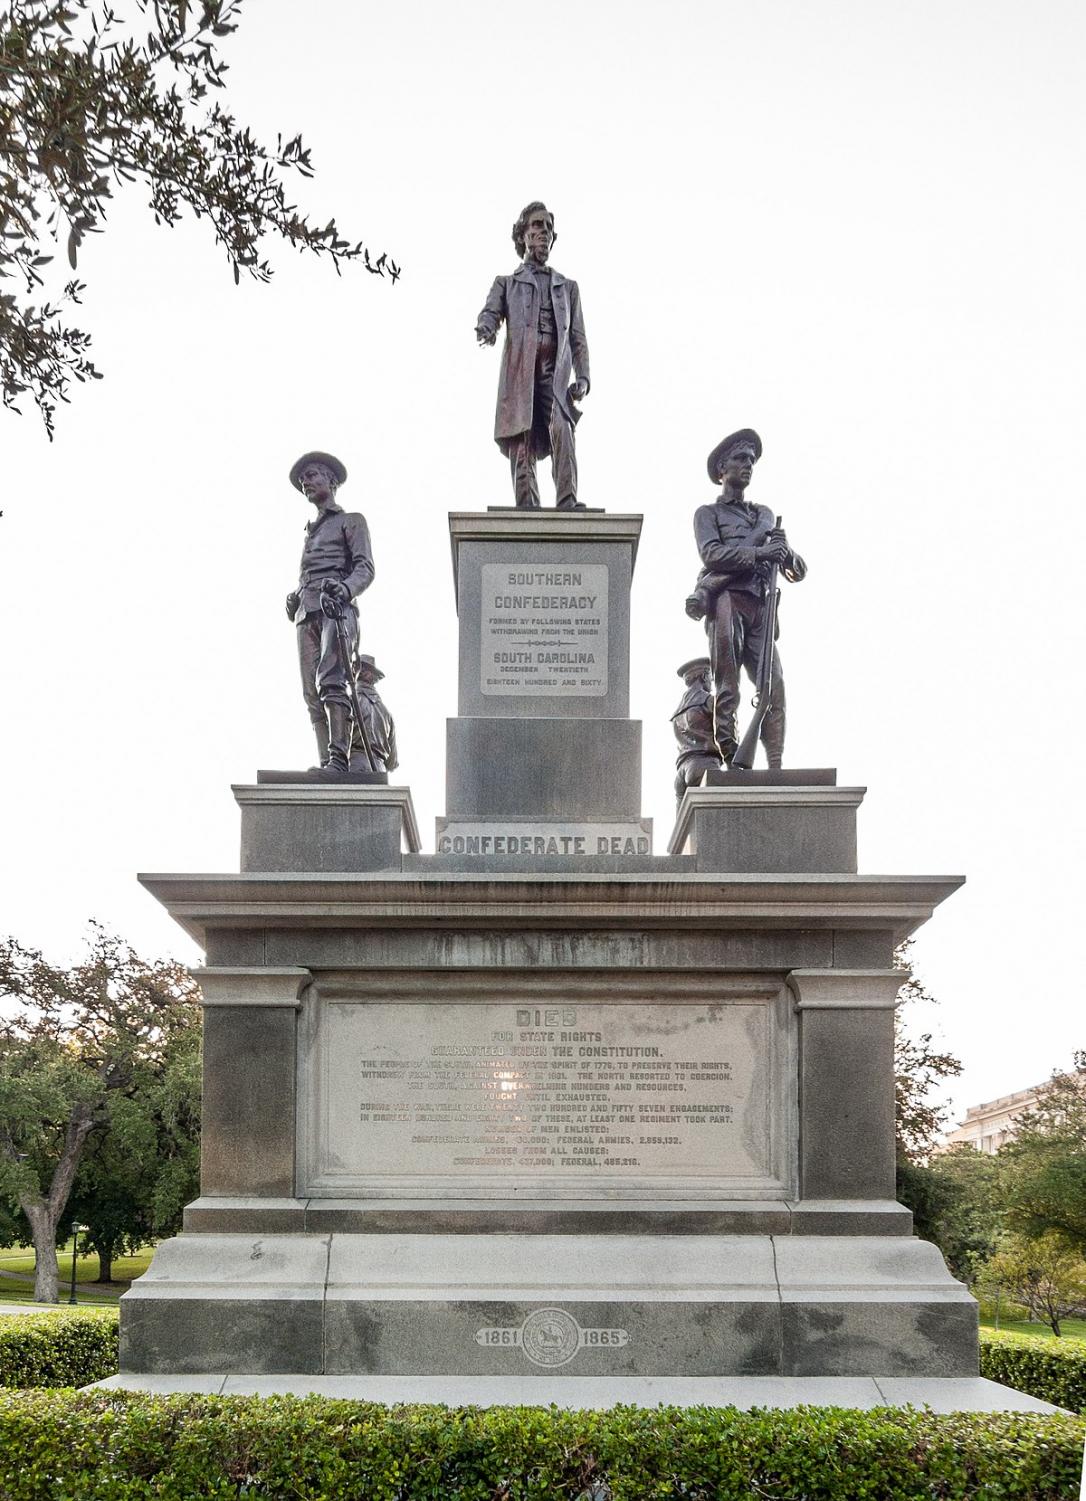 Opinion: Texas Rangers are like Confederate statues that must go